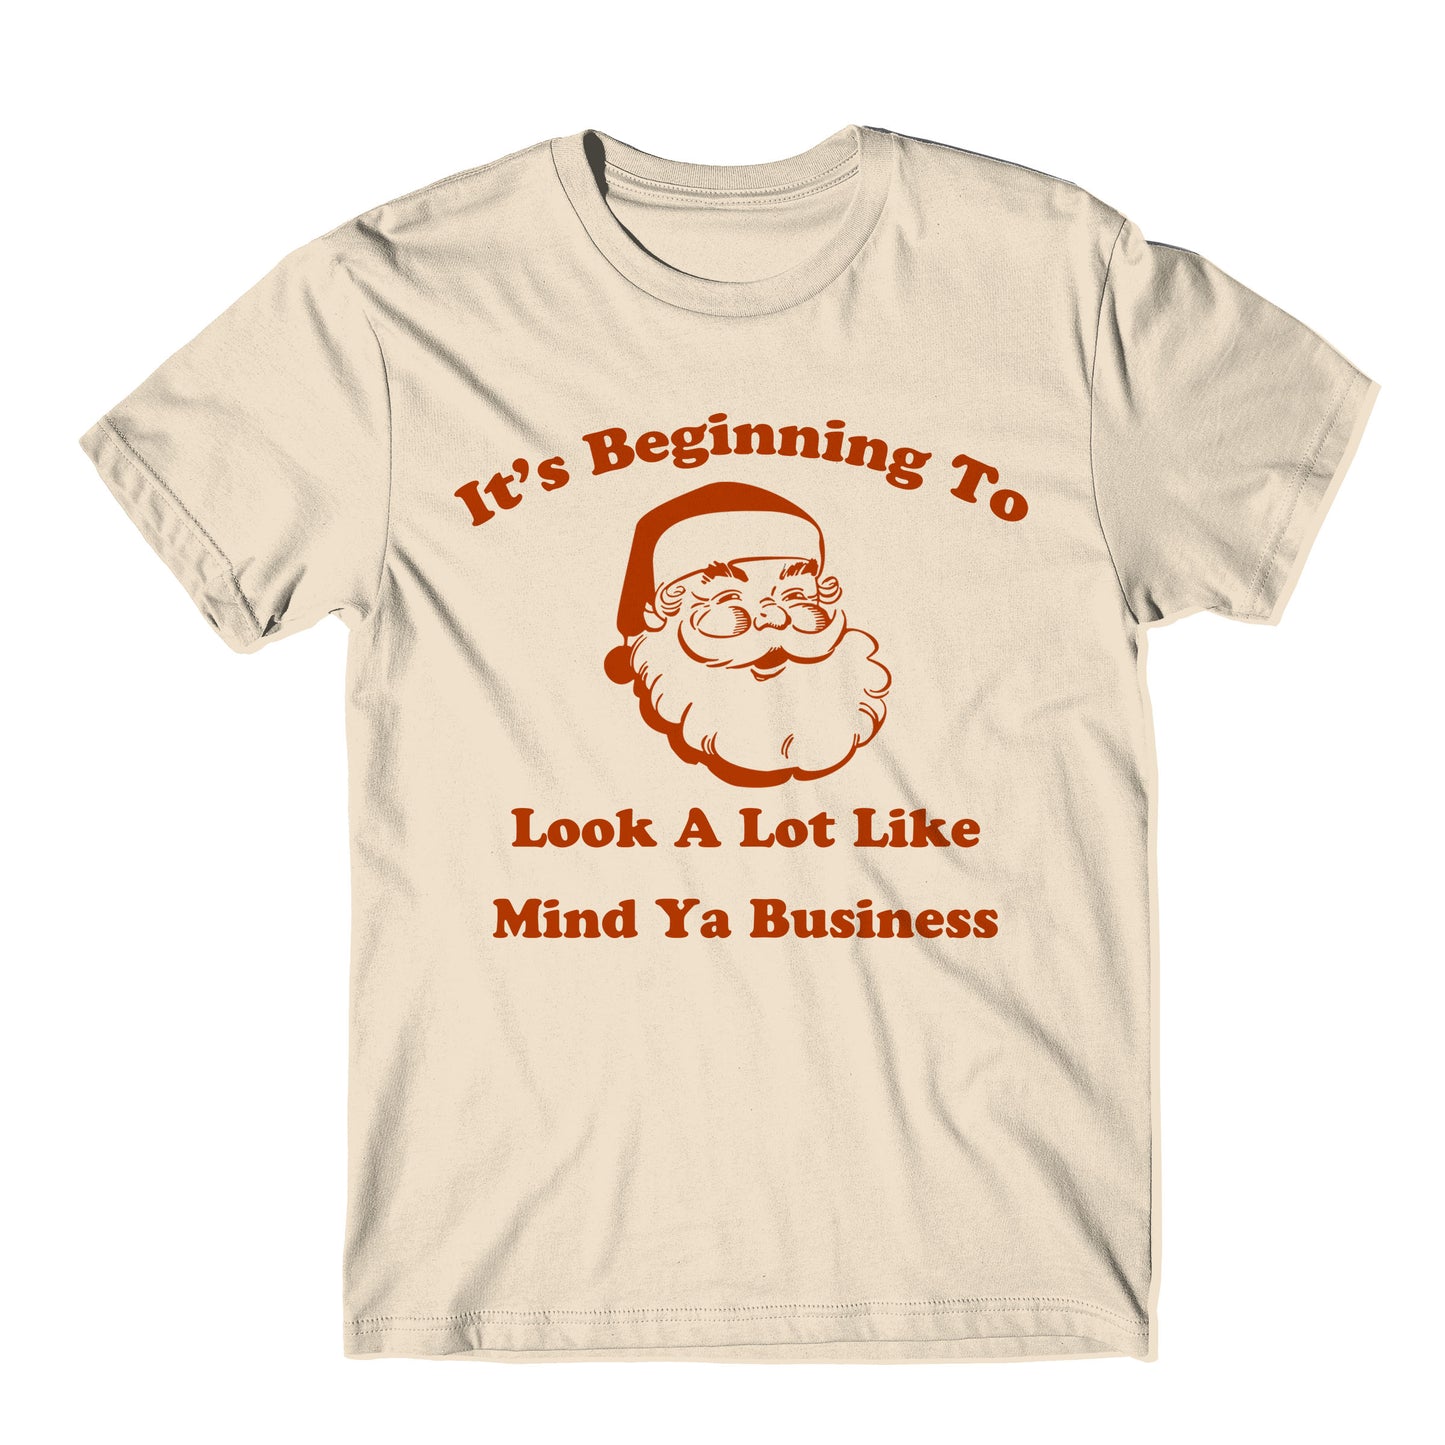 "It's Beginning To Look A Lot Like Mind Ya Business" Tee